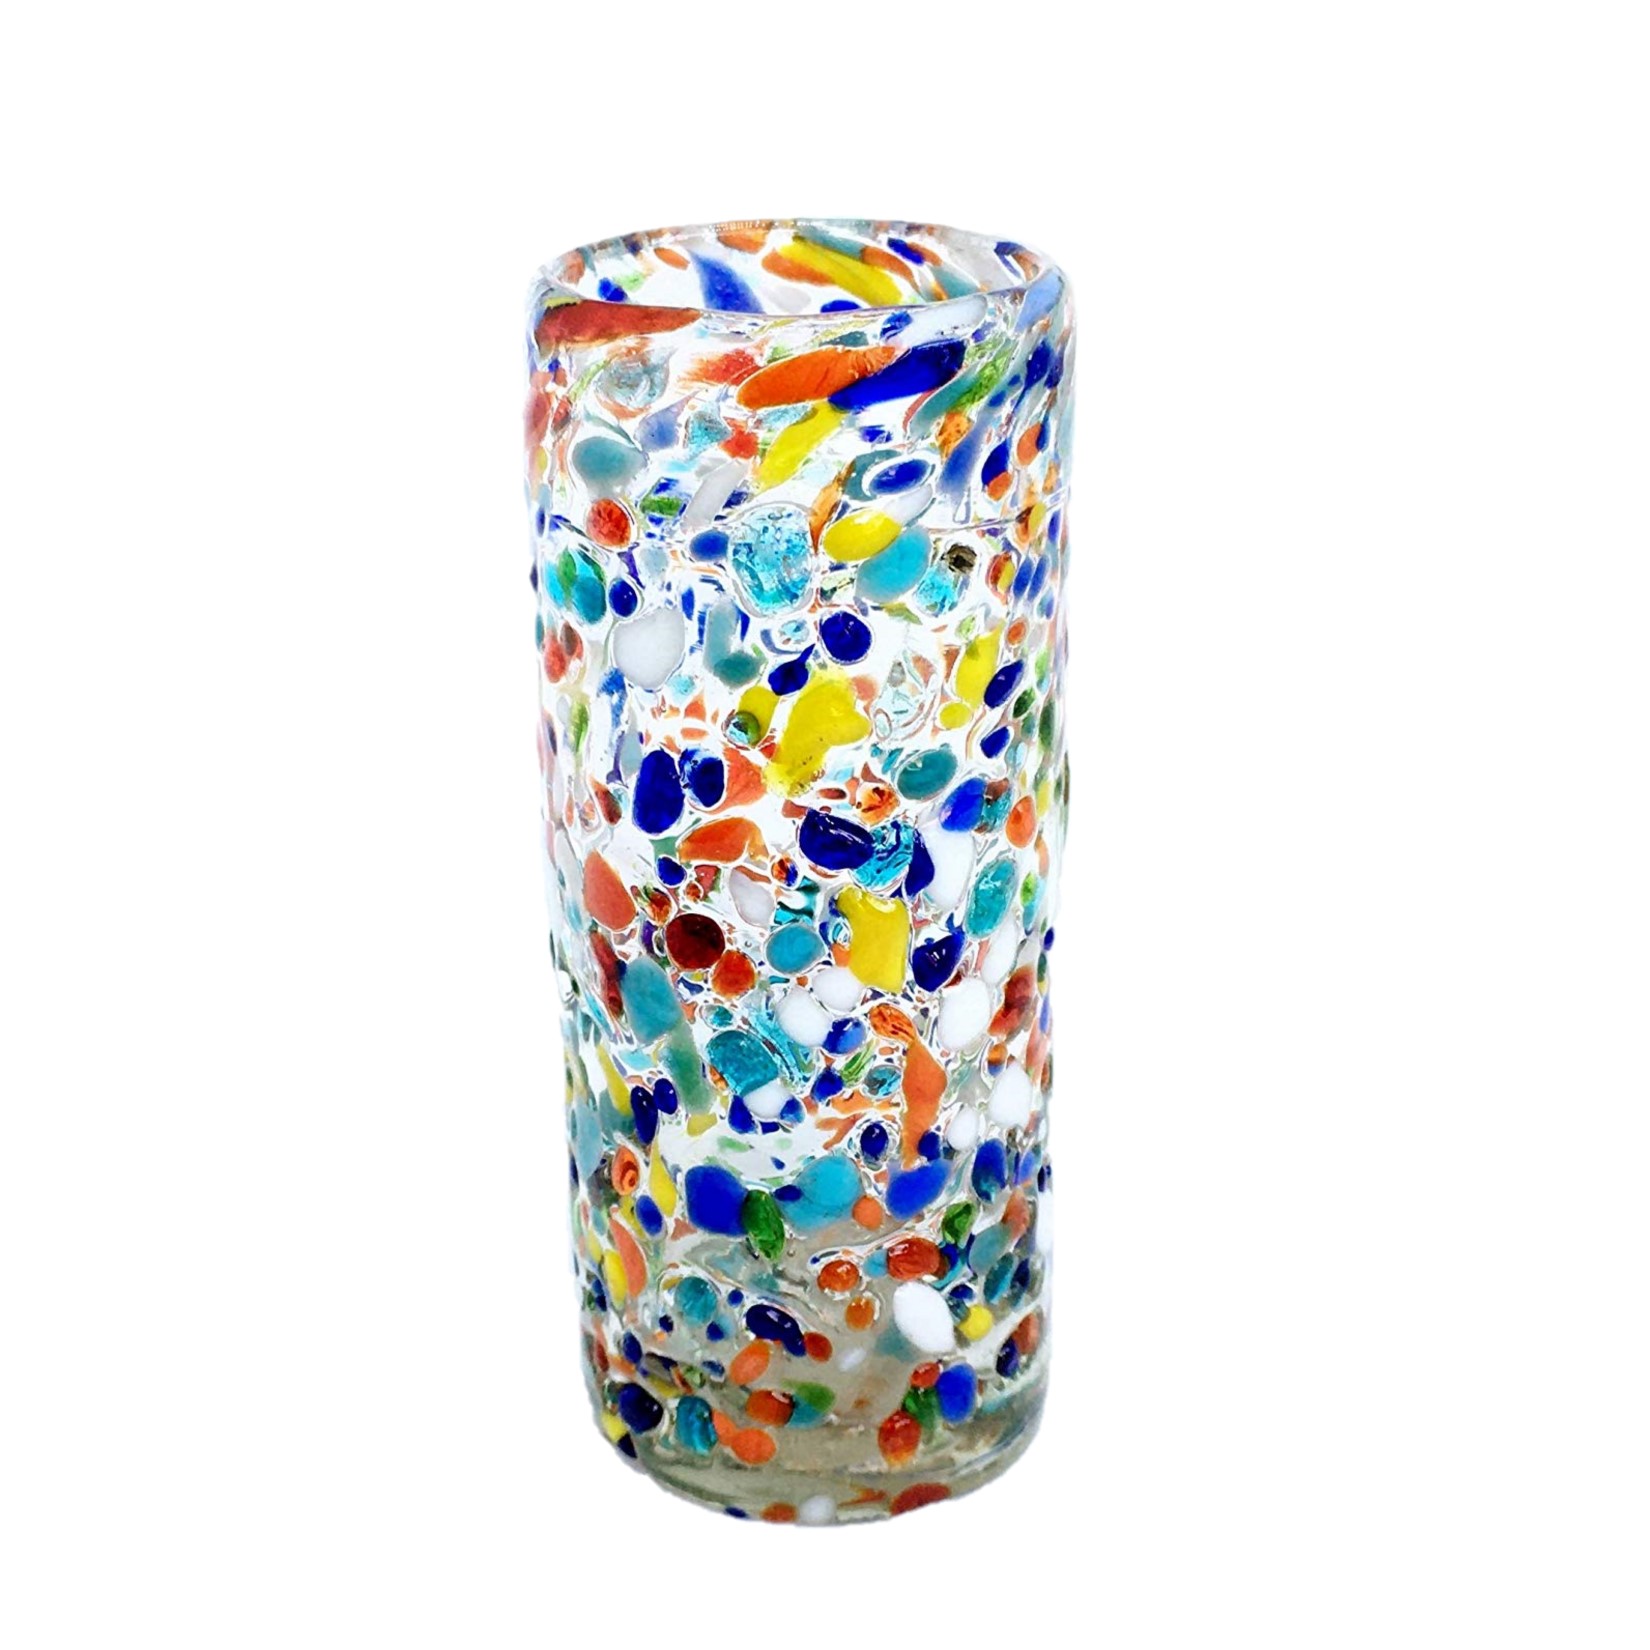 New Items / Confetti Rocks 2 oz Tequila Shot Glasses  / Sip your favorite Tequila or Mezcal with these iconic Confetti Rocks shot glasses, which are a must-have of any bar. Crafted one by one by skilled artisans in Tonala, Mexico, each glass is different from the next making them unique works of art. They feature our colorful Confetti rocks design with small colored-glass rounded cristals embedded in clear glass that give them a nice feeling and grip. These shot glasses are festive and fun, making them a perfect gift for anyone. Get ready for your next fiesta!!